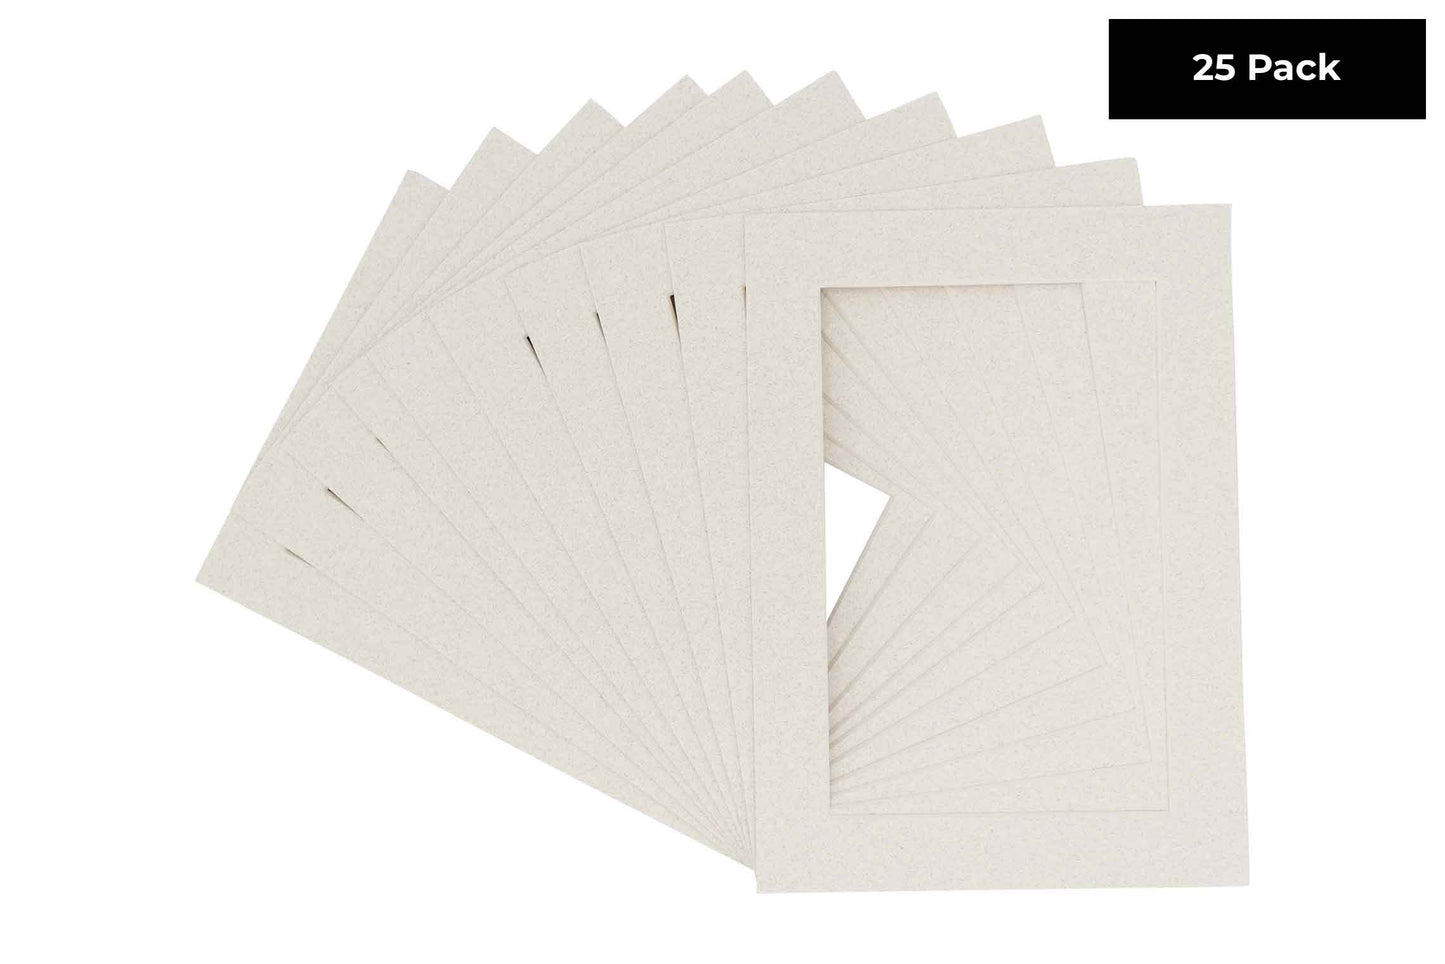 Pack of 25 Oyster Shell White Precut Acid-Free Matboards